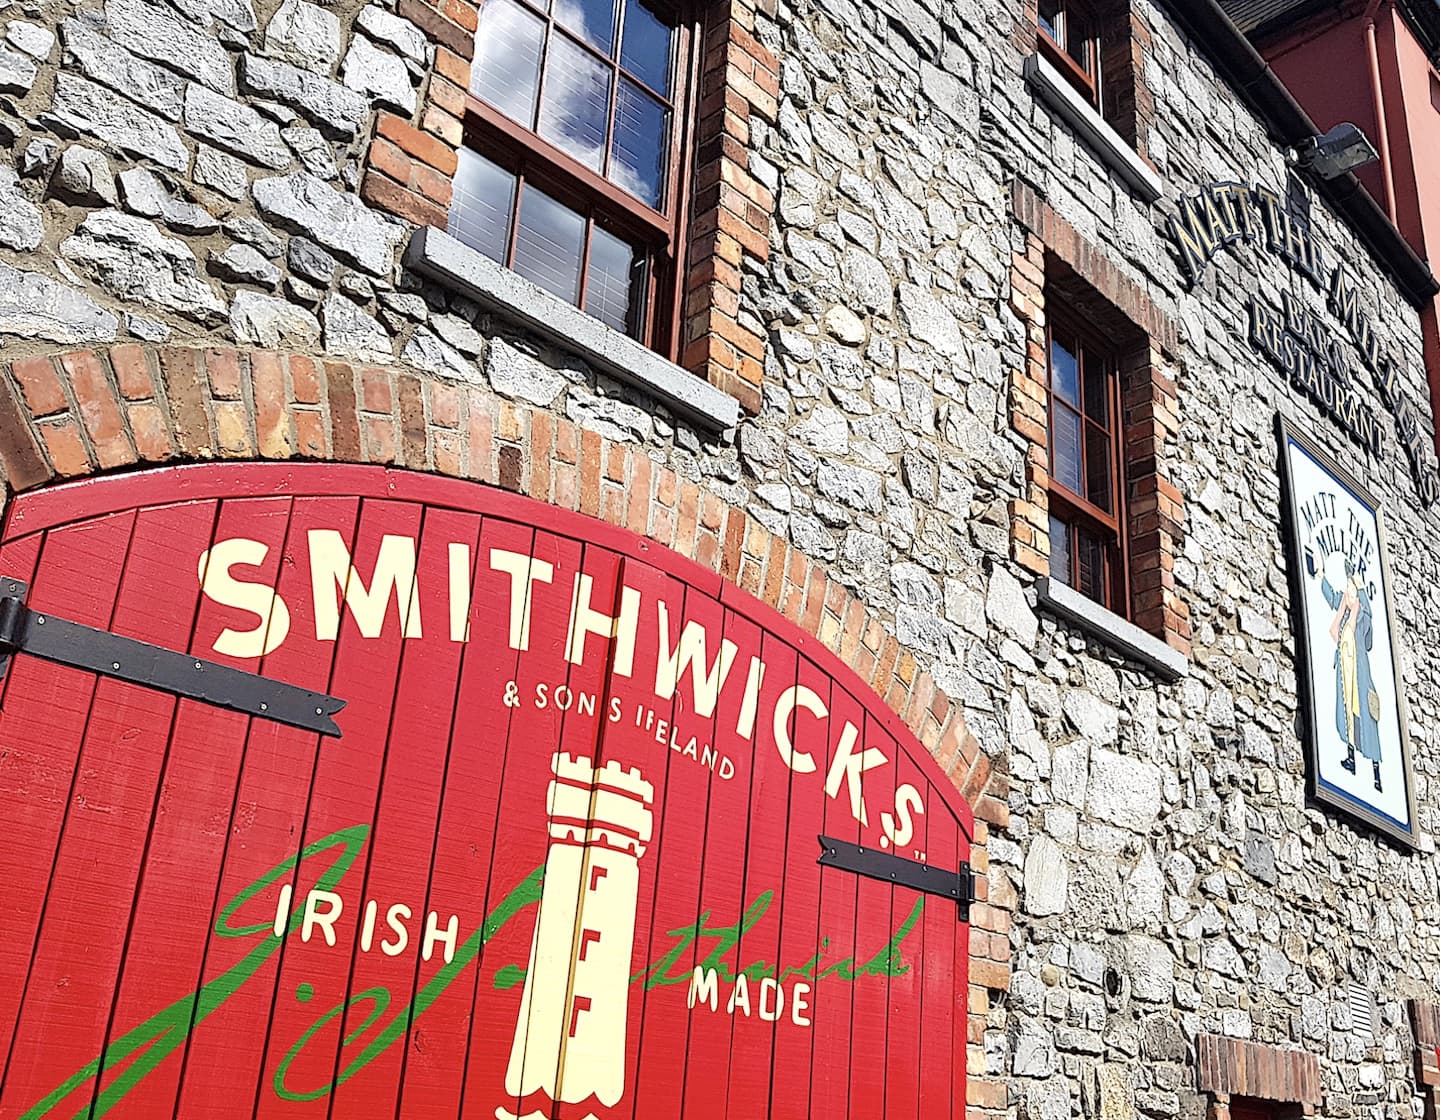 Red door entrance to the Smithwick's distillery